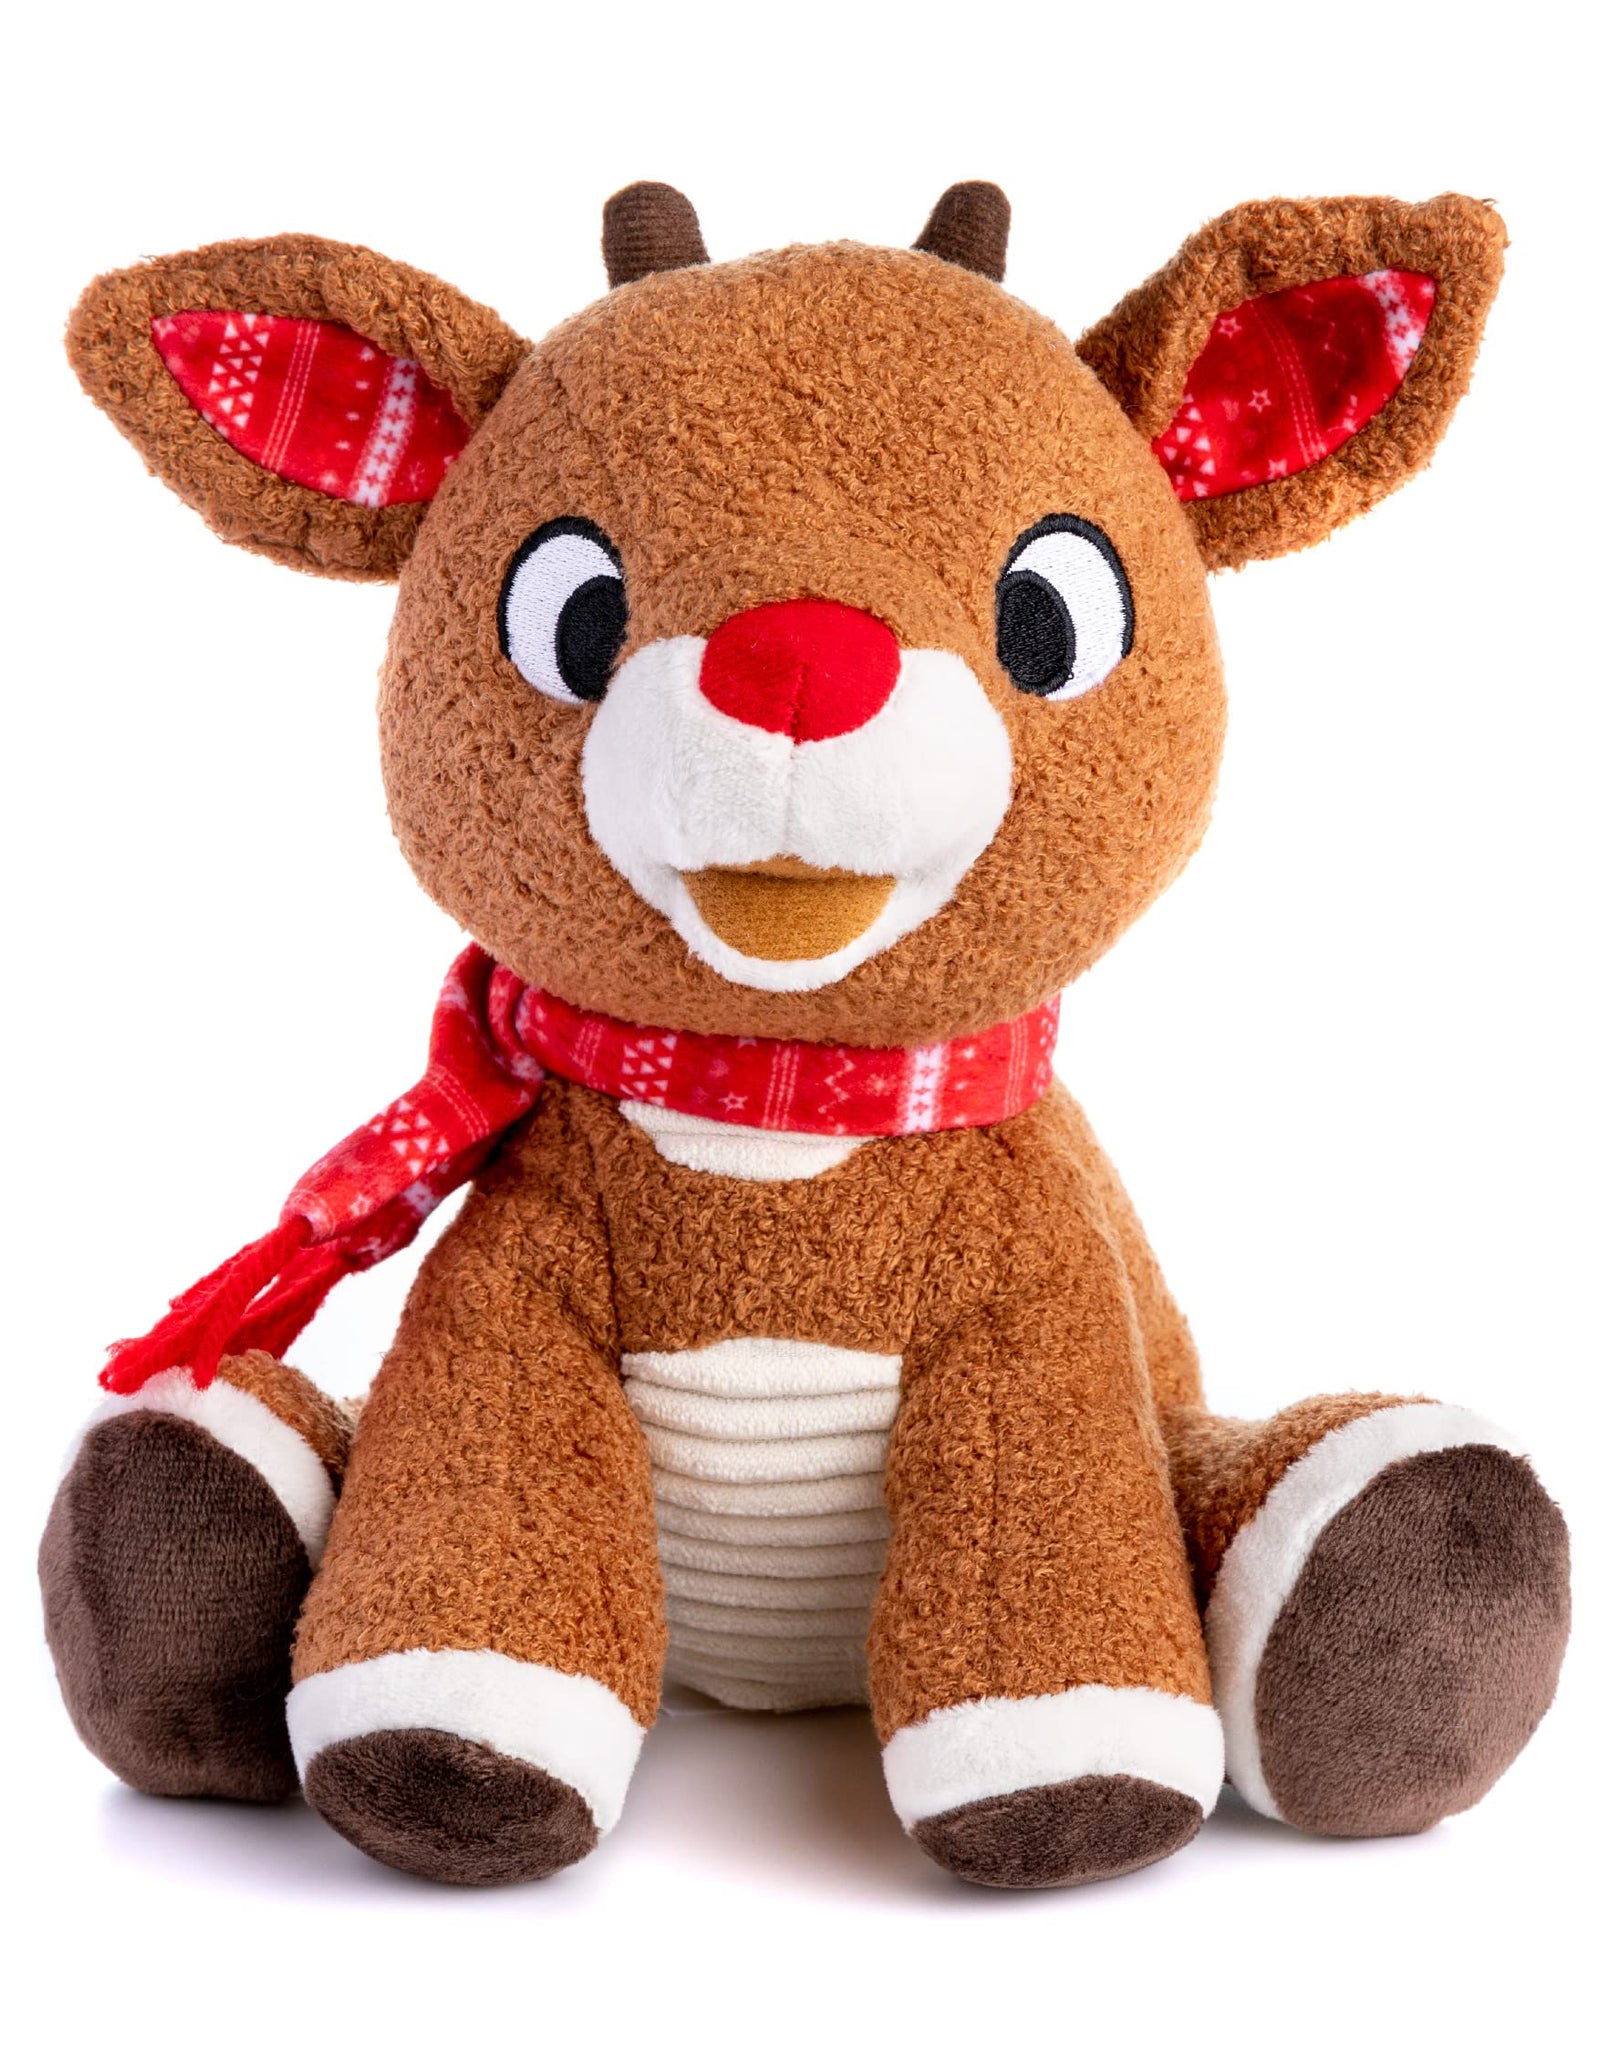 KIDS PREFERRED Rudolph the Red - Nosed Reindeer - Stuffed Animal Plush Toy 8 inches